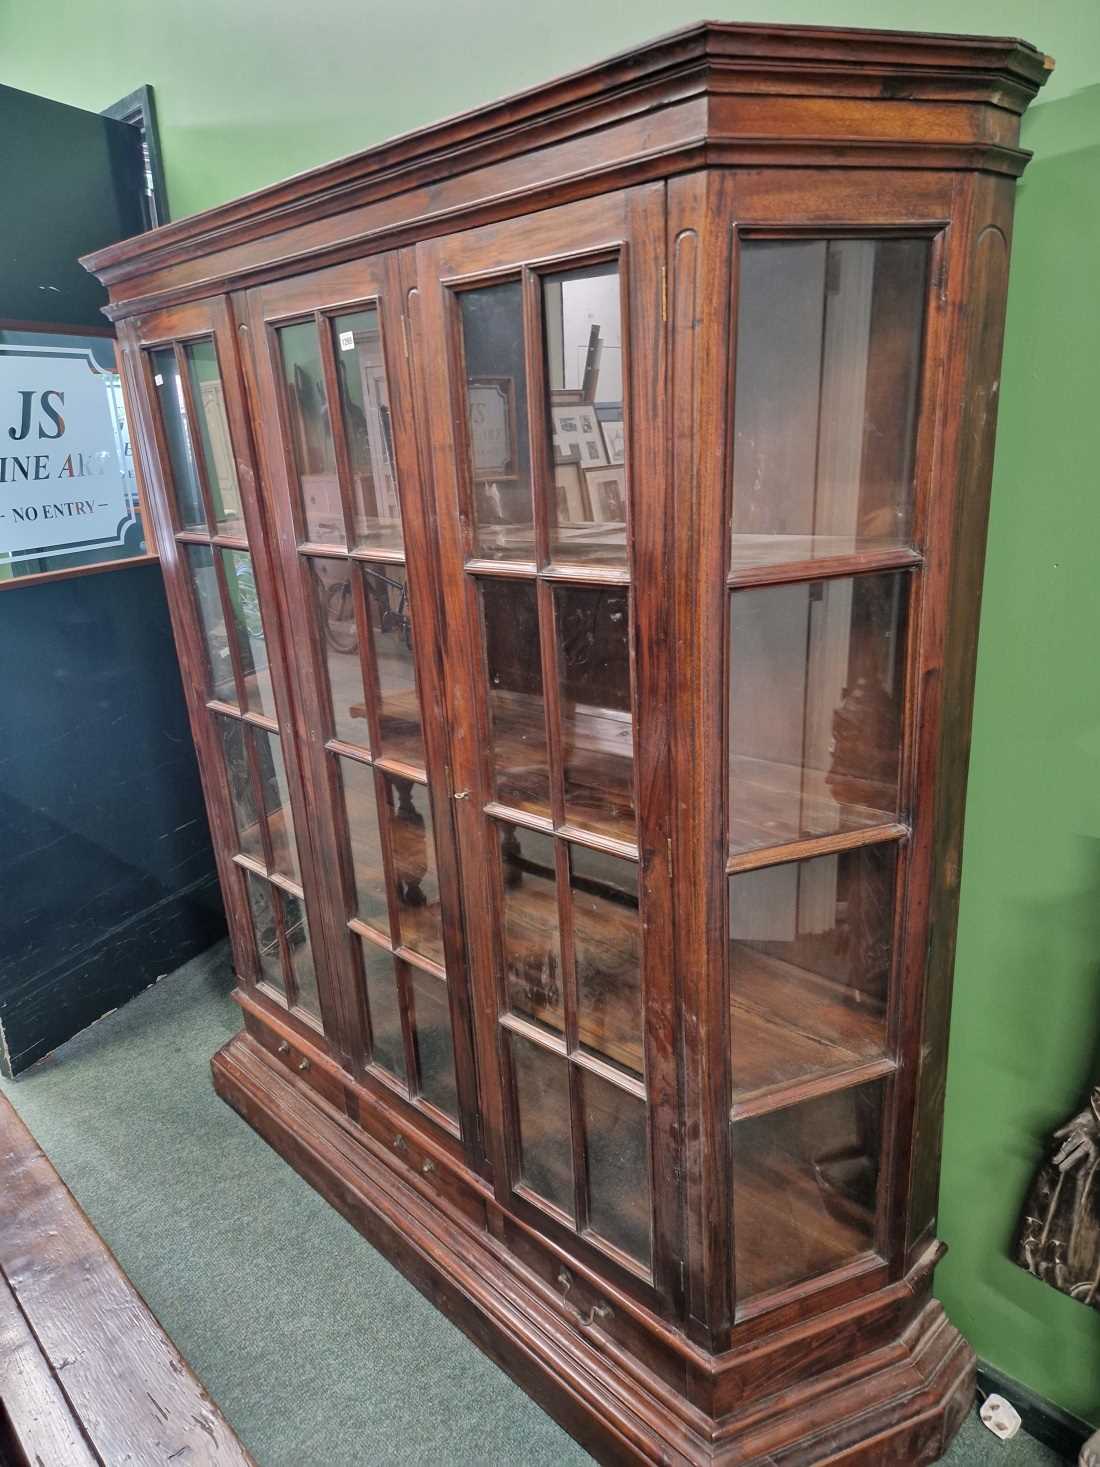 A large glazed display bookcase.